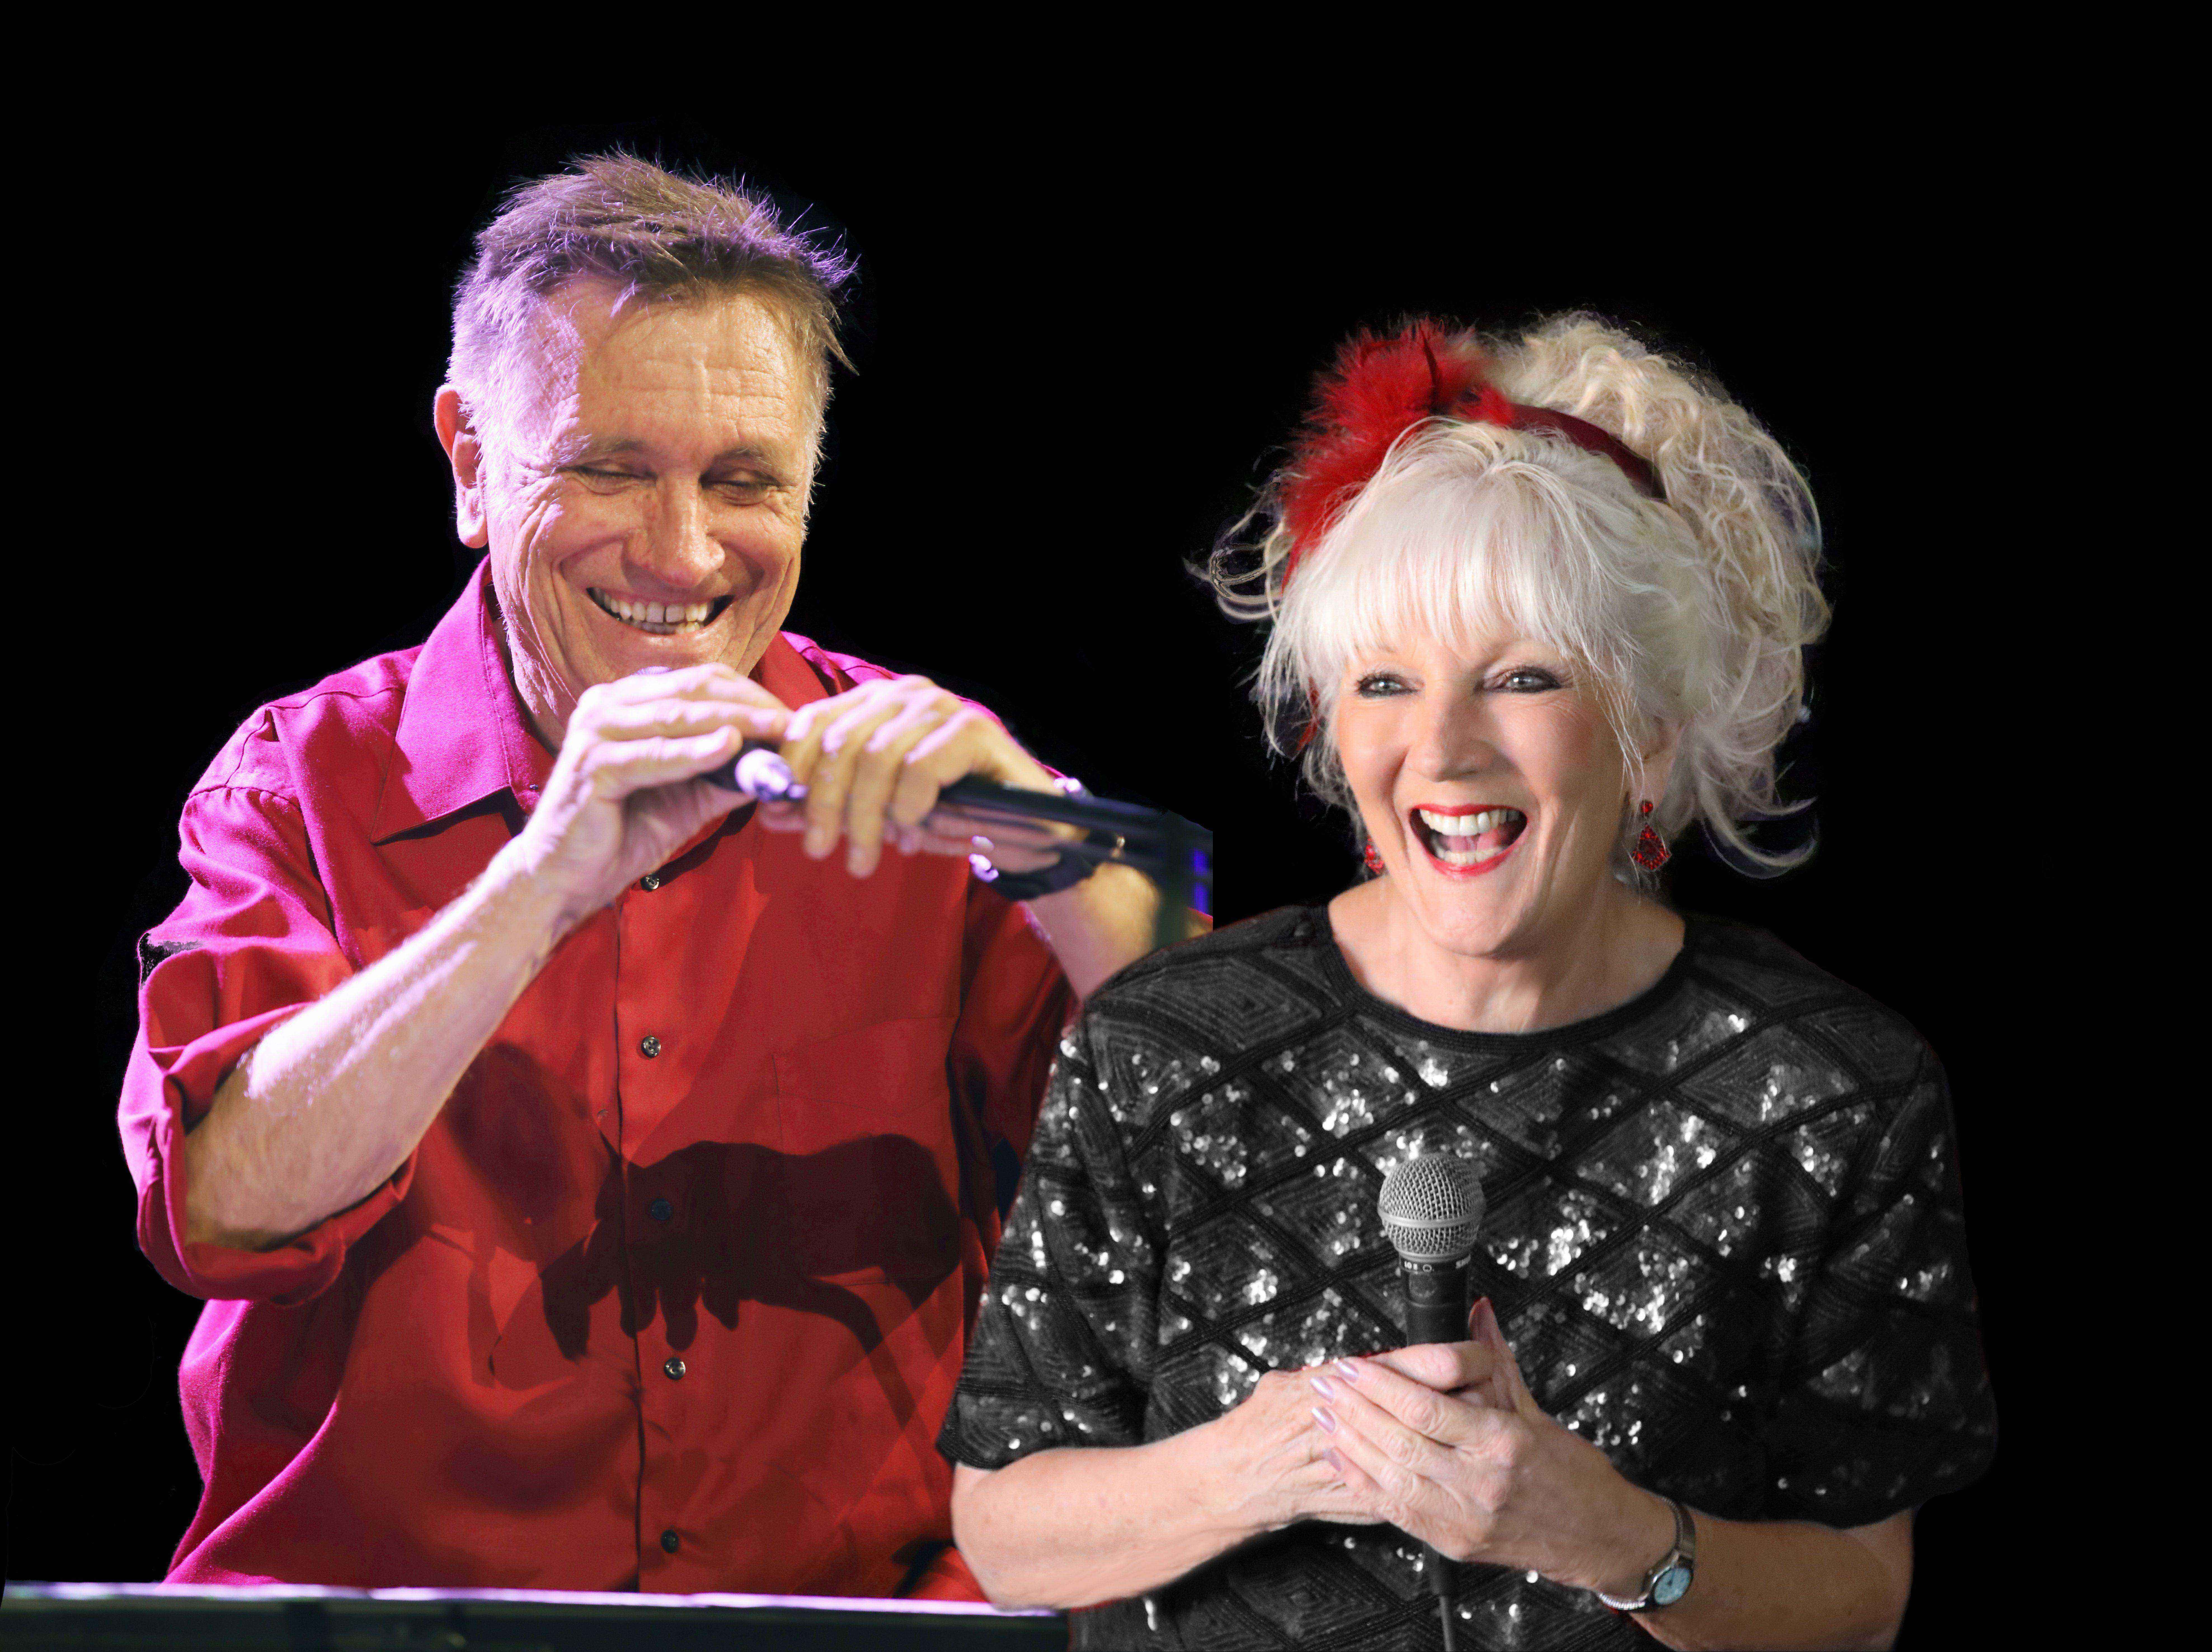 'How Good is 2019!' - Canberra political satire at Tanja this Sunday